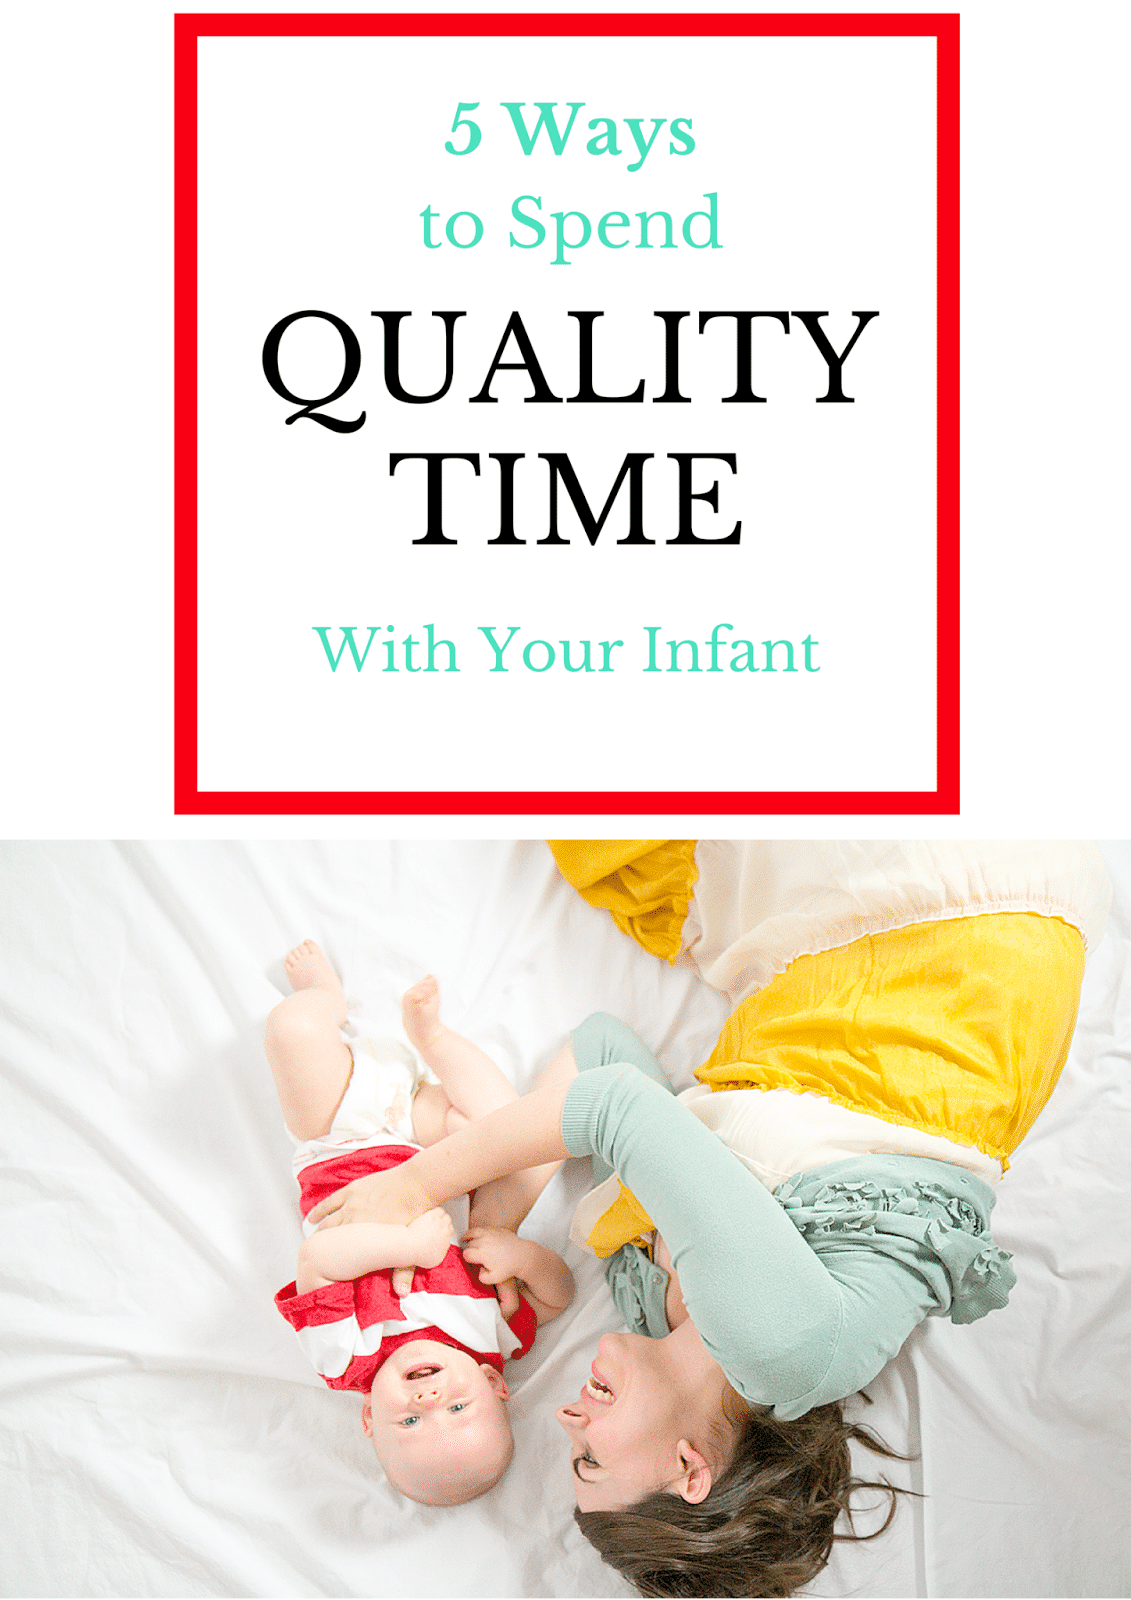 5 Ways to Spend Quality Time with Your Infant